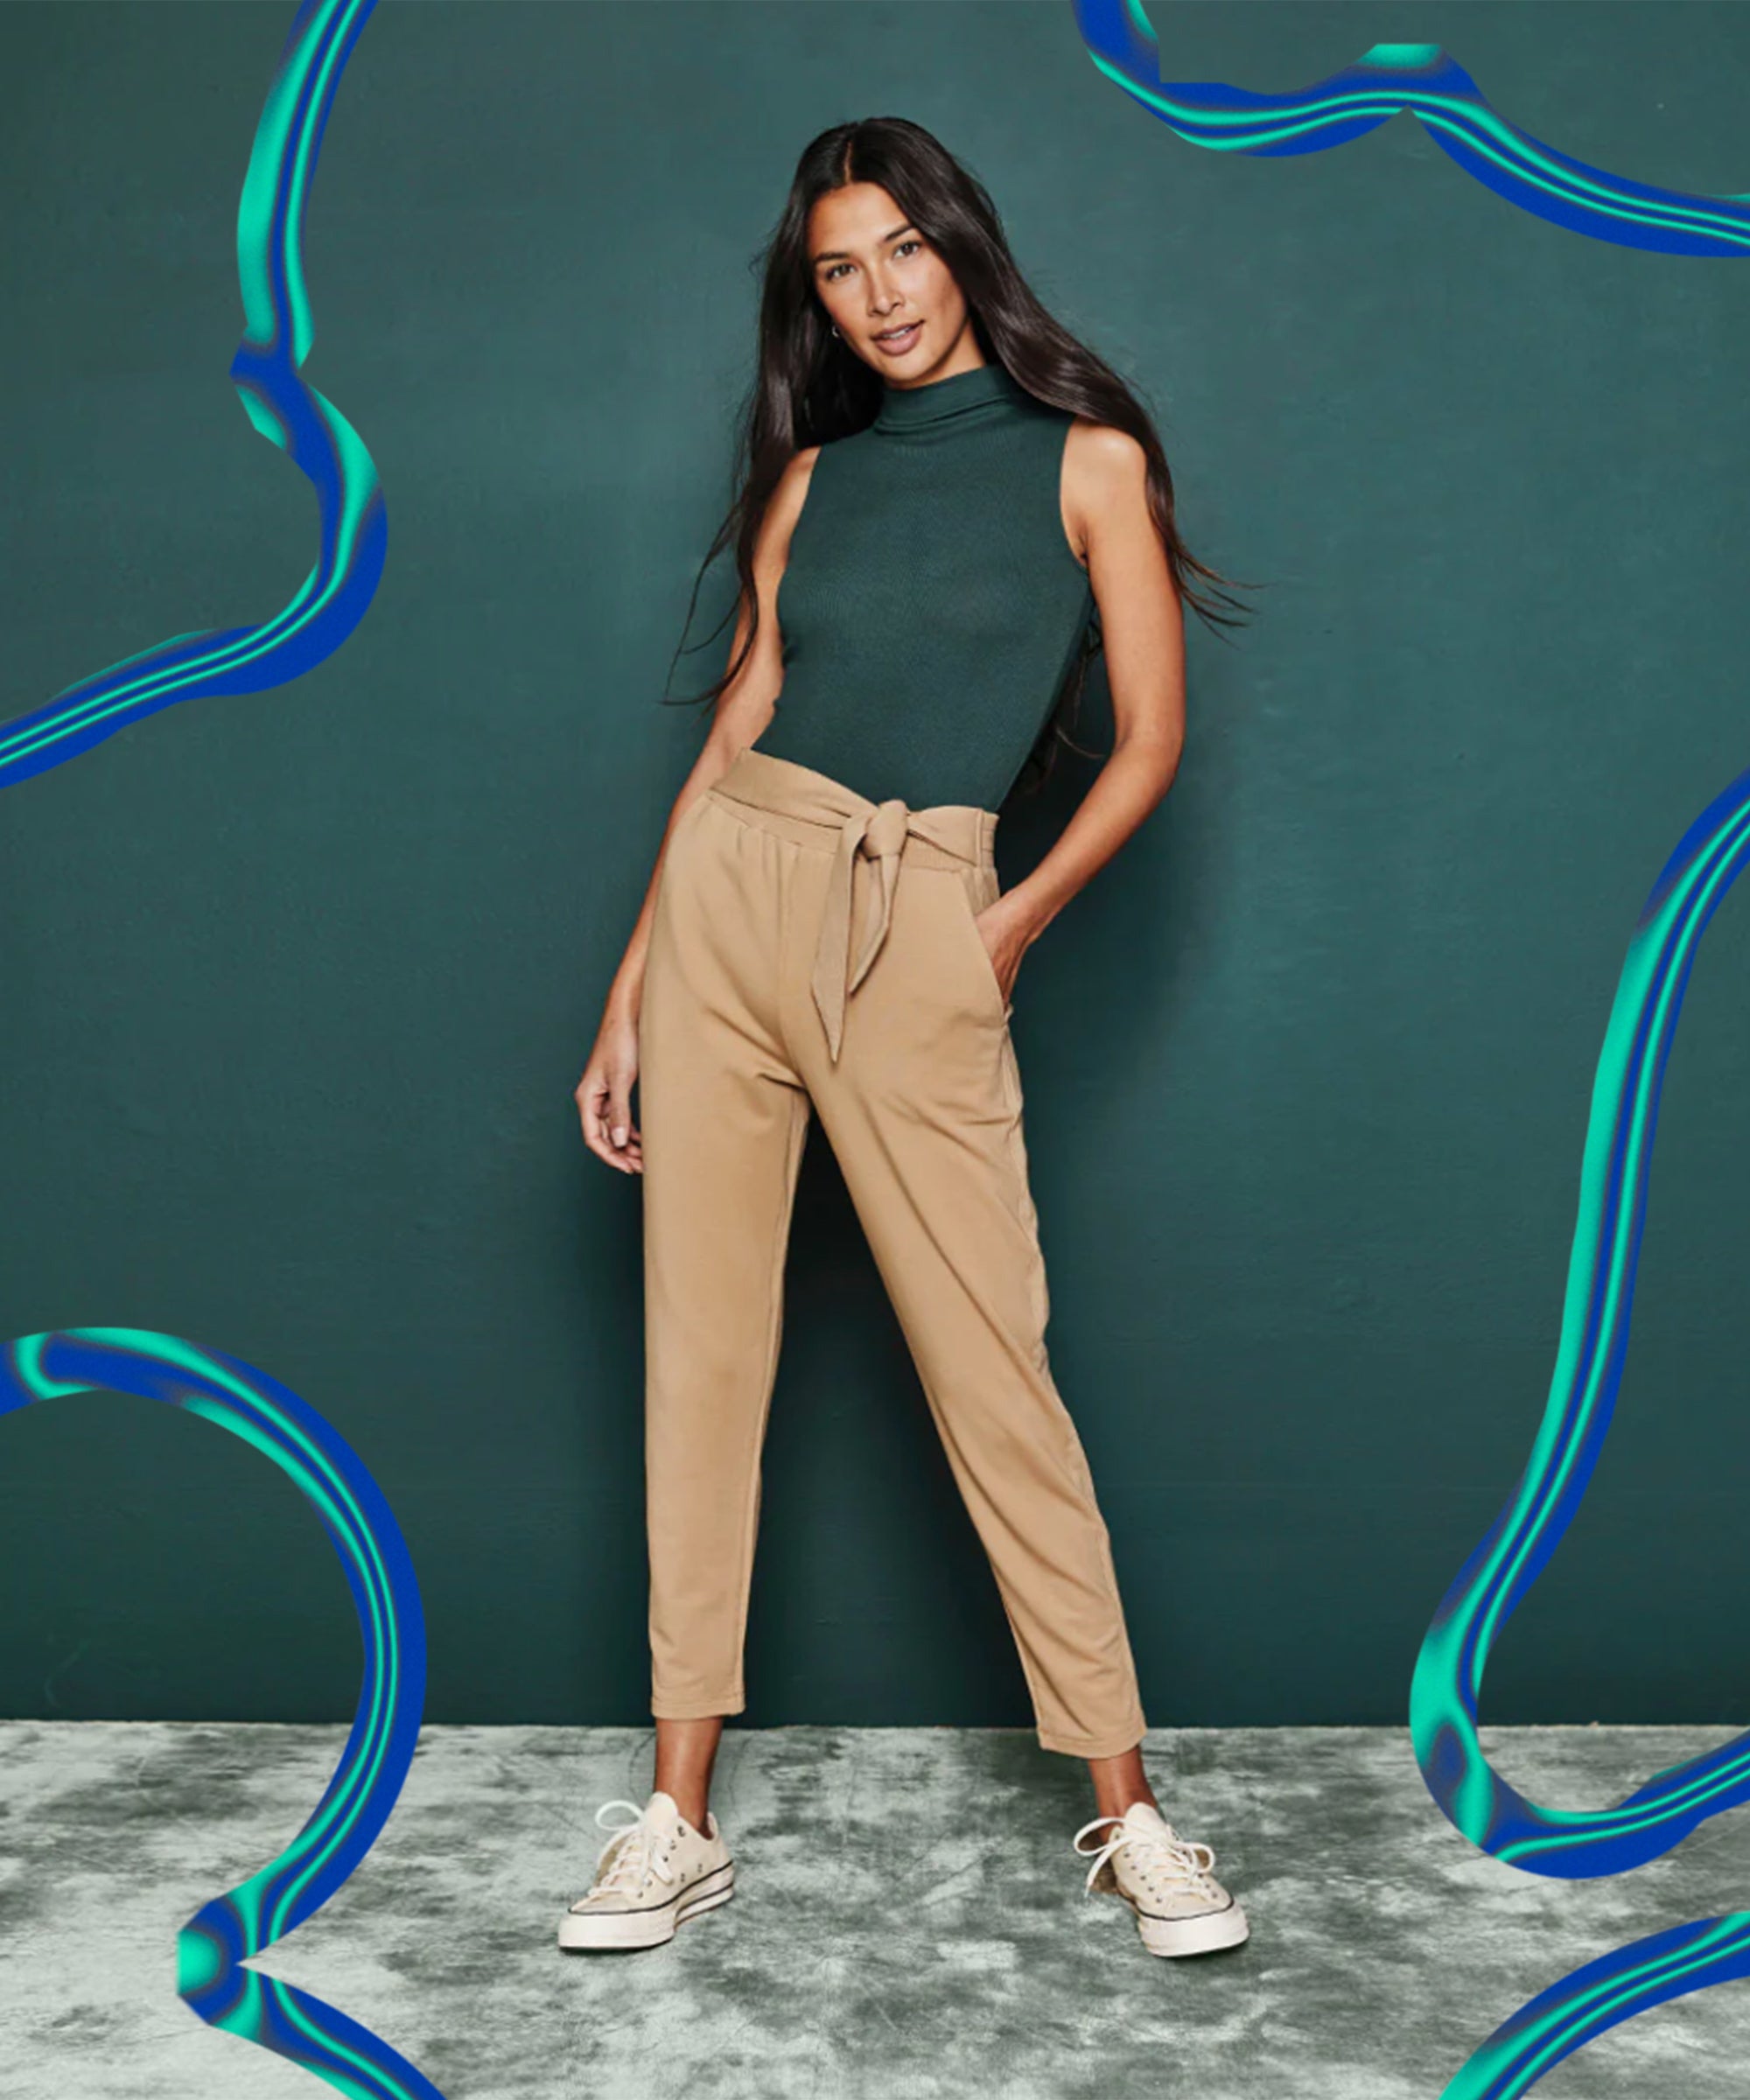 The Best Petite Pants for Women